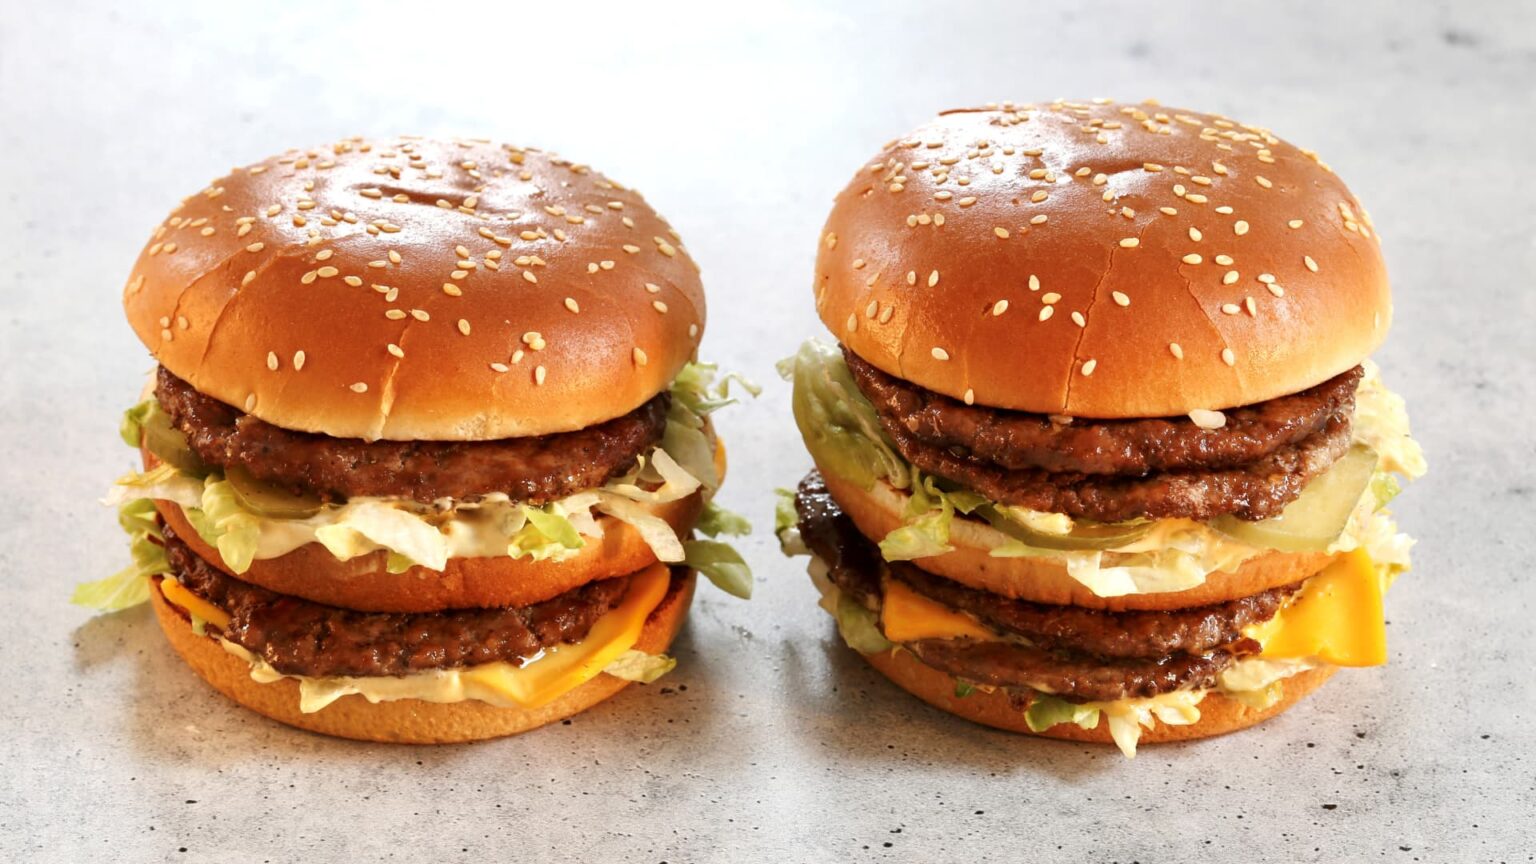 McDonald's launches 'Best Burger' ahead of earnings report